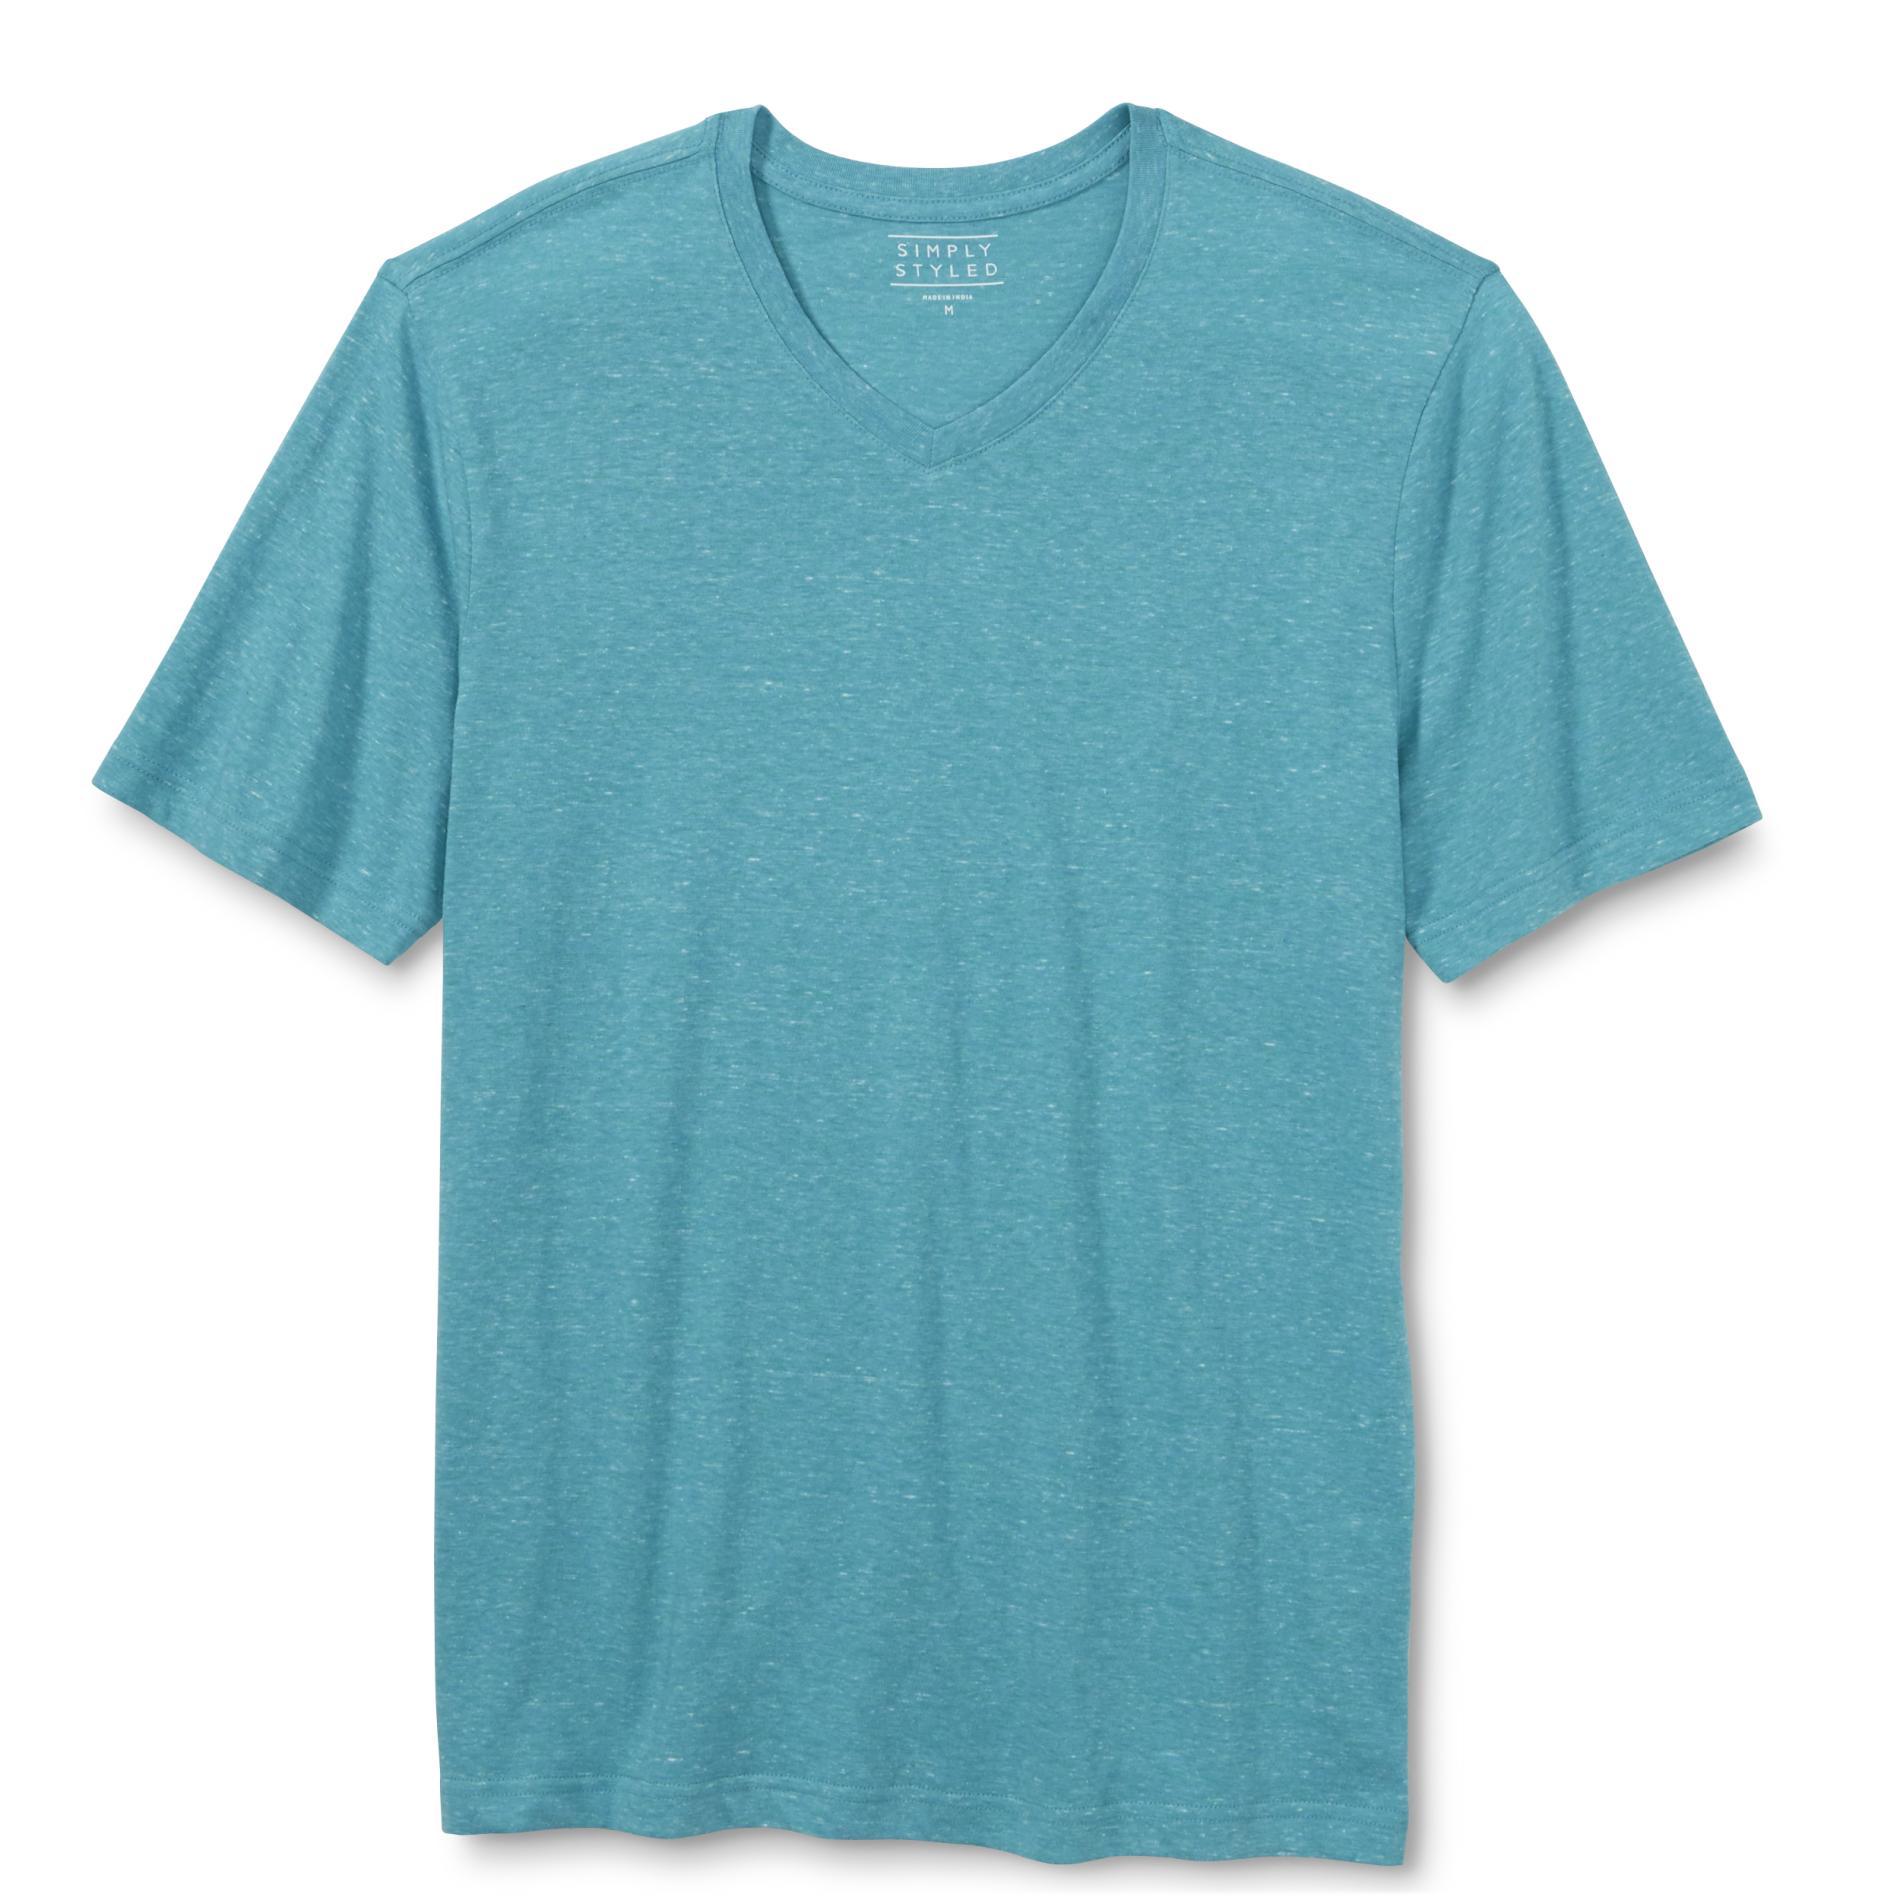 Simply Styled Men's V-Neck T-Shirt - Space Dyed - Sears